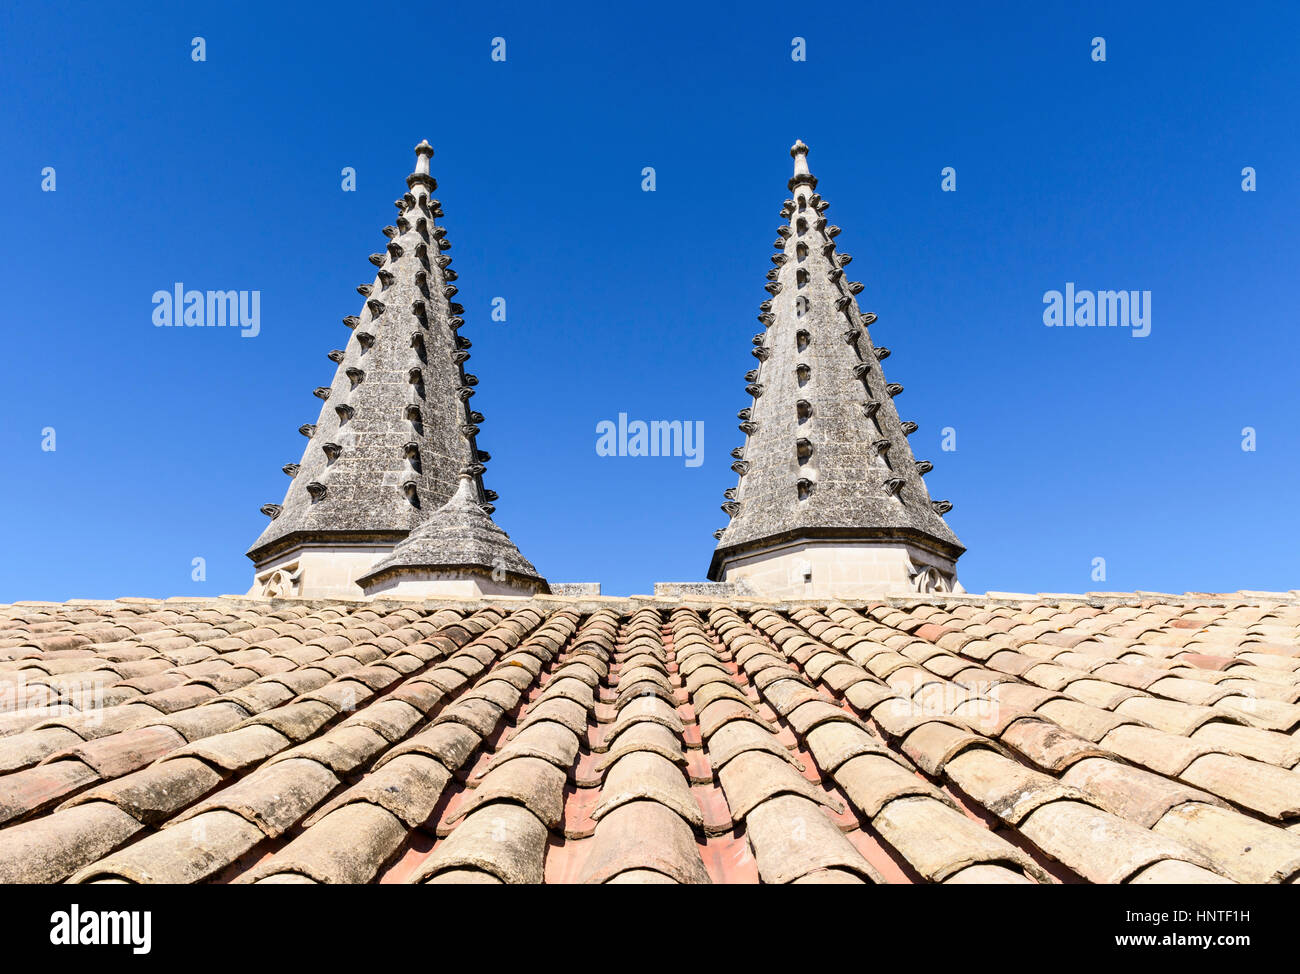 Architectural detail of the twin turrets of the Palais Neuf, Palais des Papes, Avignon, France Stock Photo